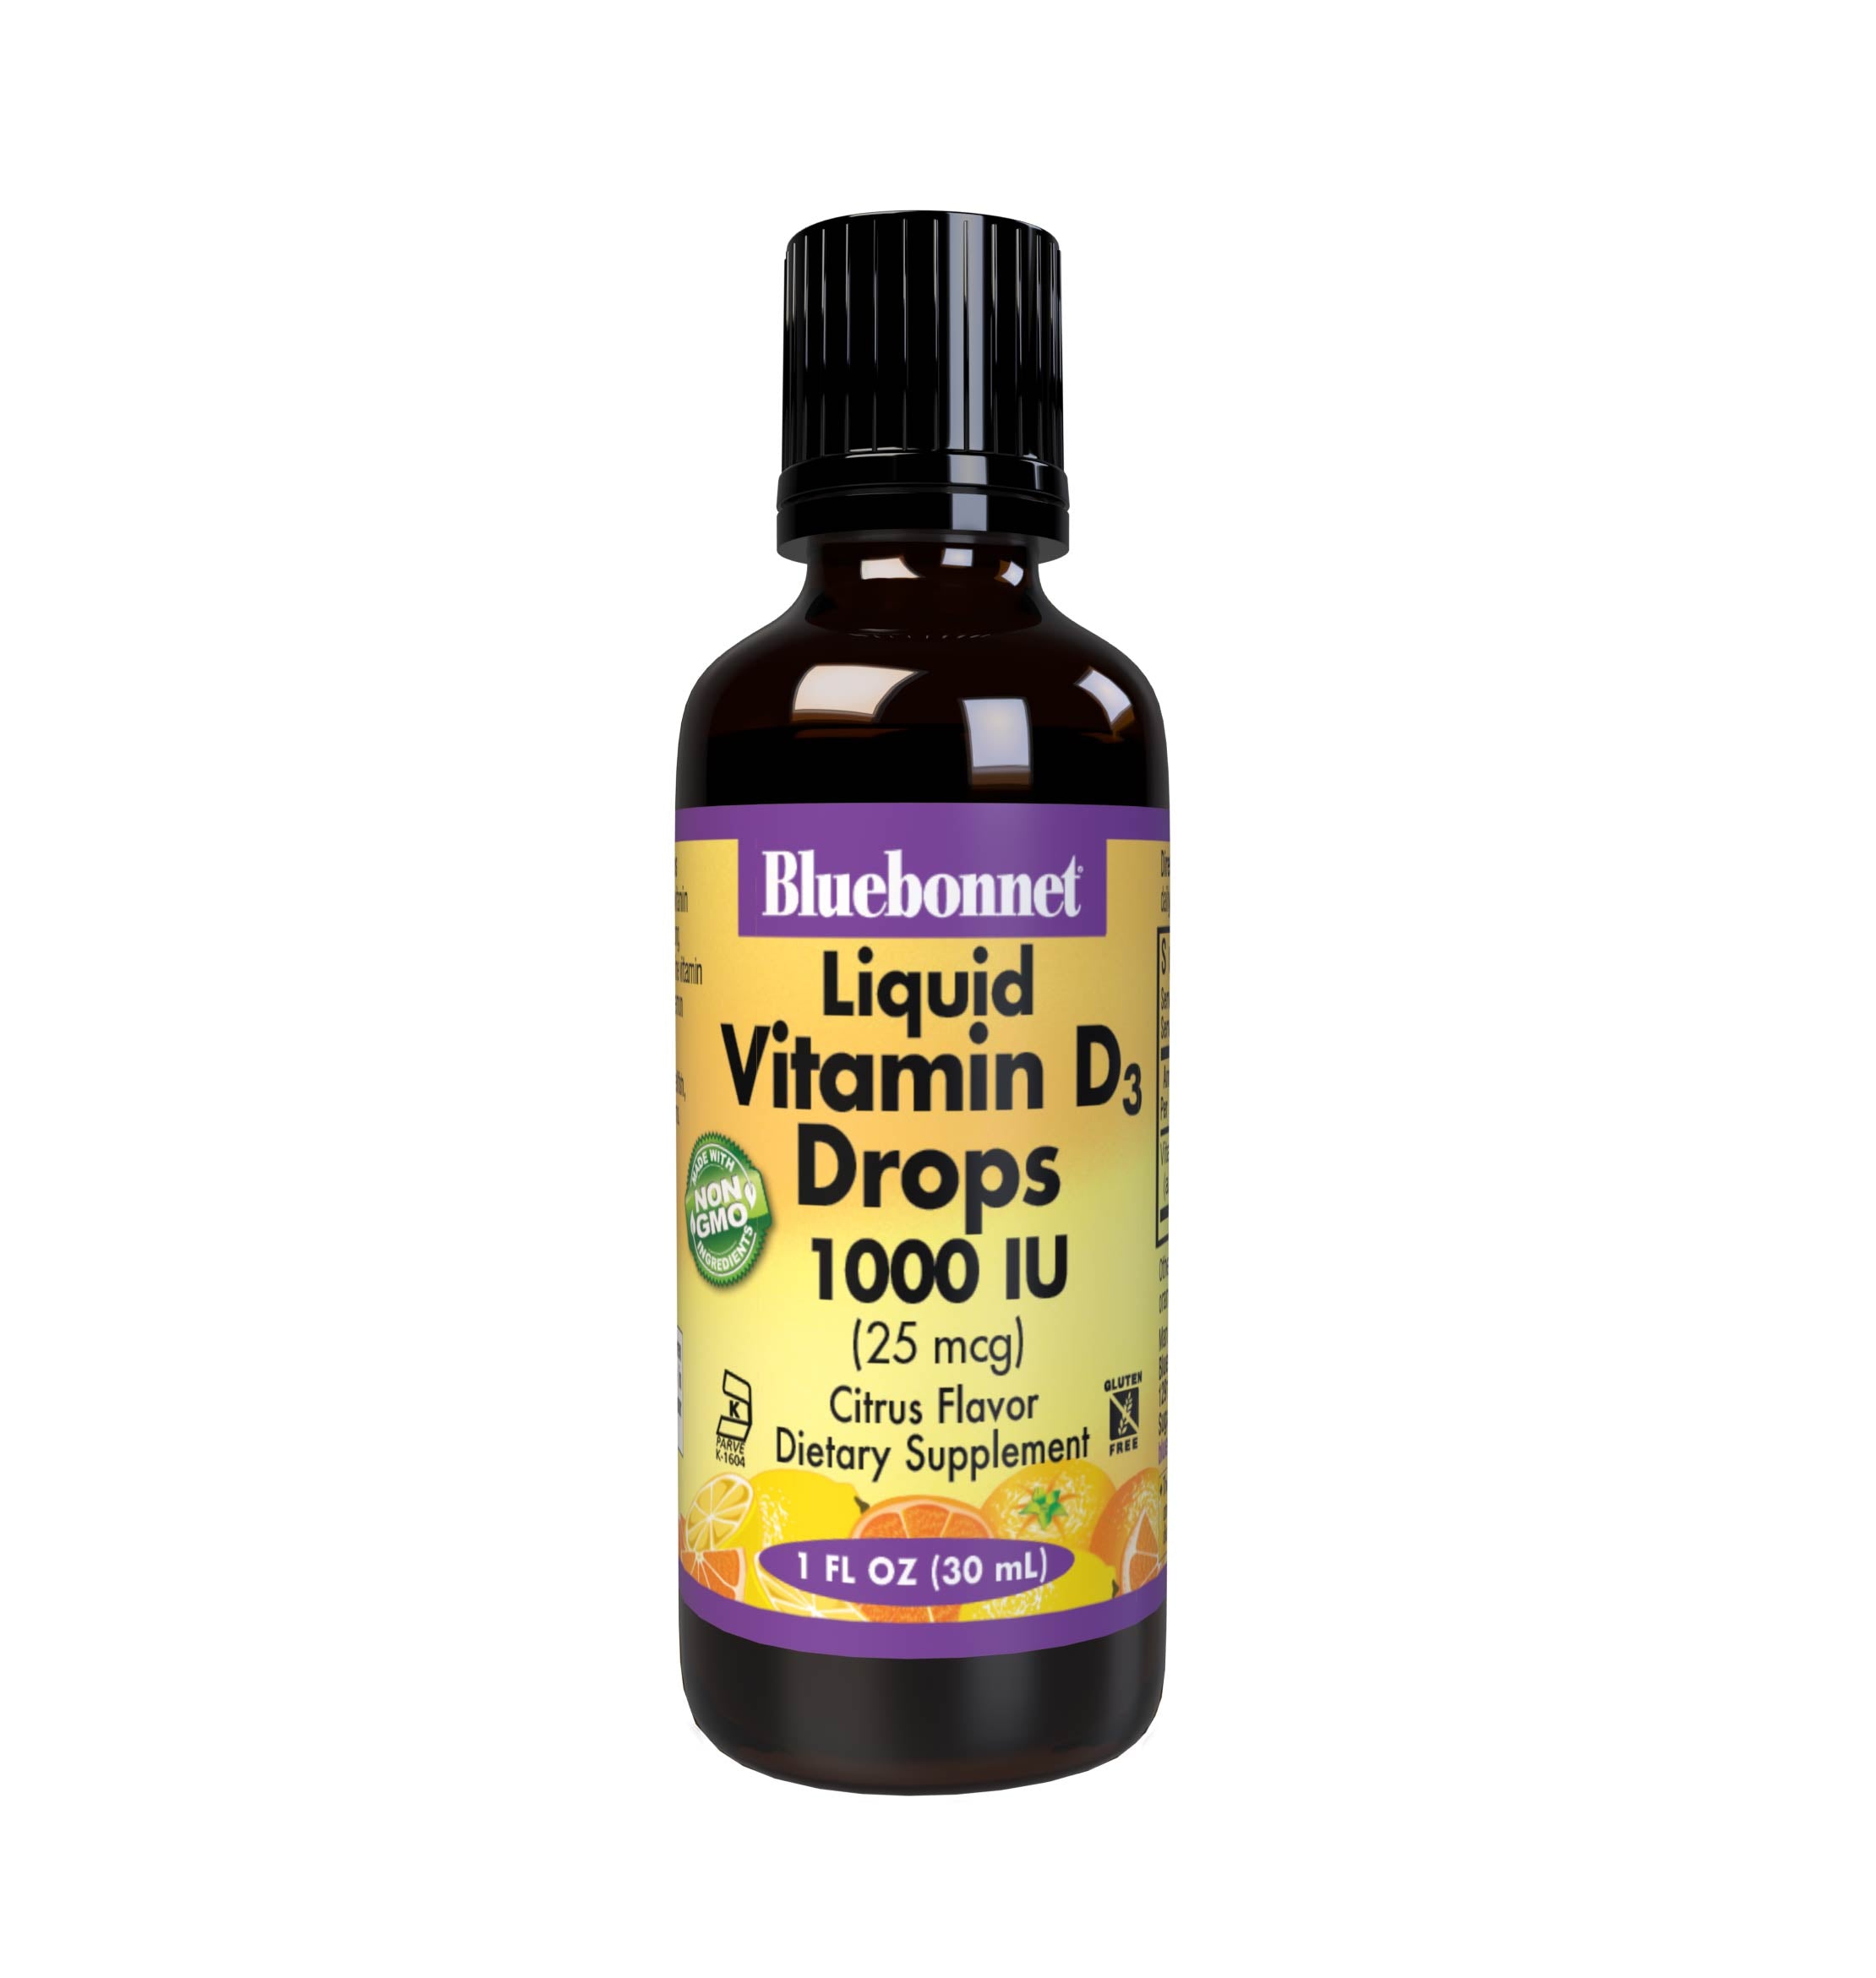 Bluebonnet’s Liquid Vitamin D3 Drops 1000 IU (25 mcg) are formulated with vitamin D3 (cholecalciferol) from lanolin for strong healthy bones. Each drop of this sunshine vitamin is flavored using a hint of orange and lemon essential oils. #size_1 fl oz